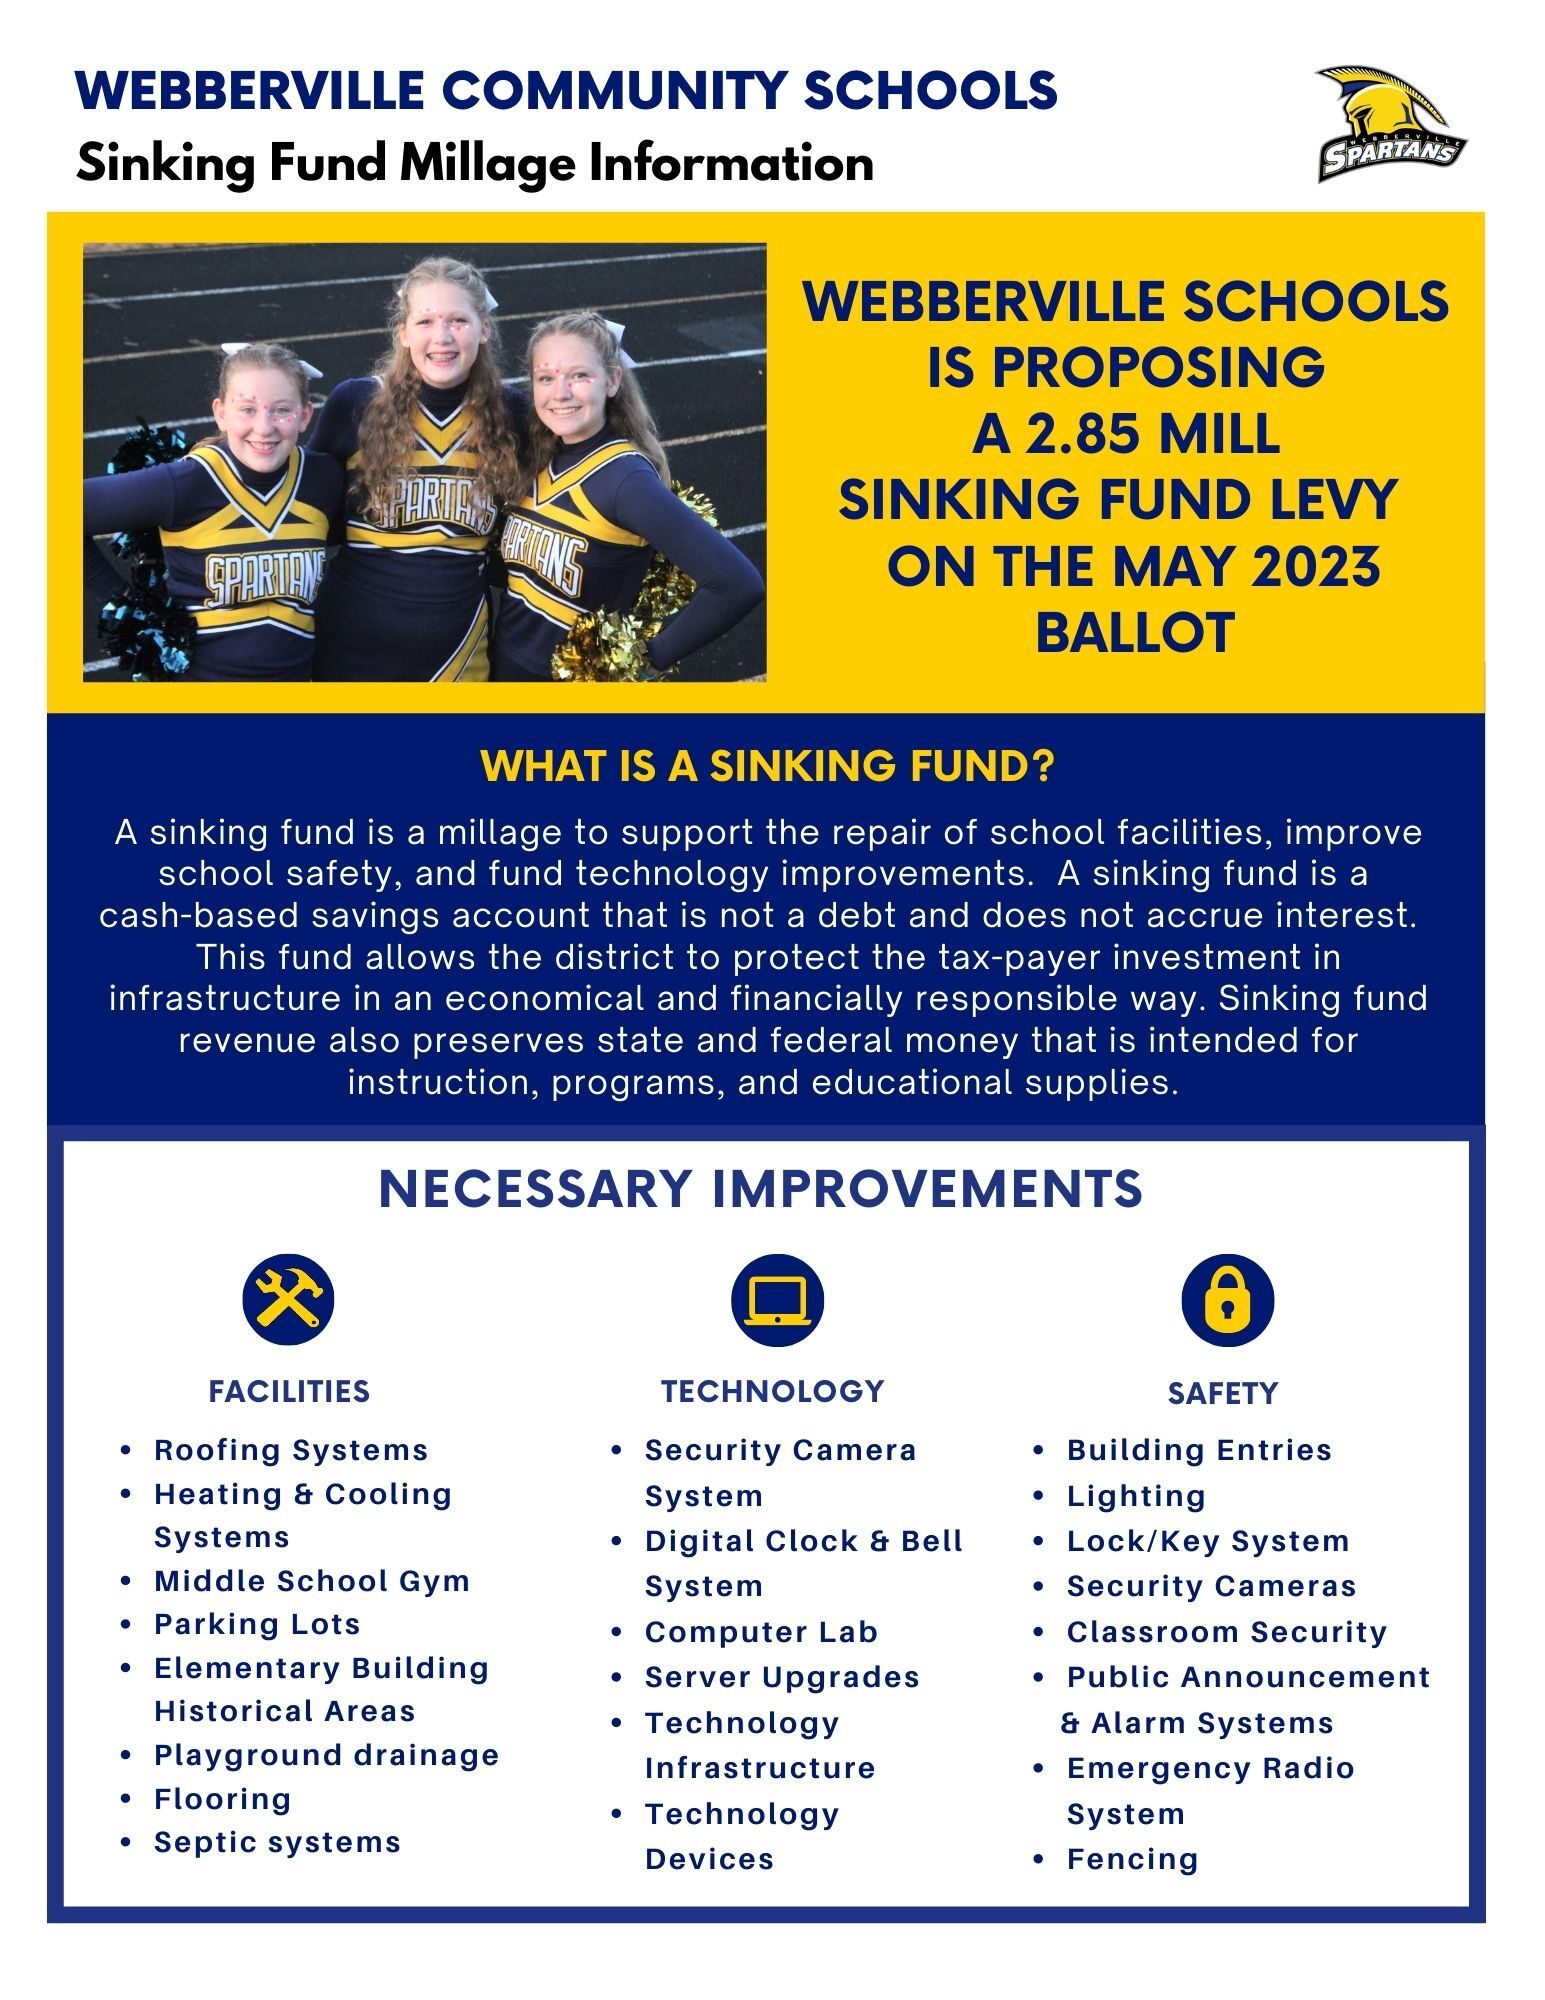 Image showing three smiling girls. Details sinking fund proposal- 2.85 mill levy on May 2 ballot. Describes sinking fund as a cash based account raised by voters to support safety, technology and infrastructure.